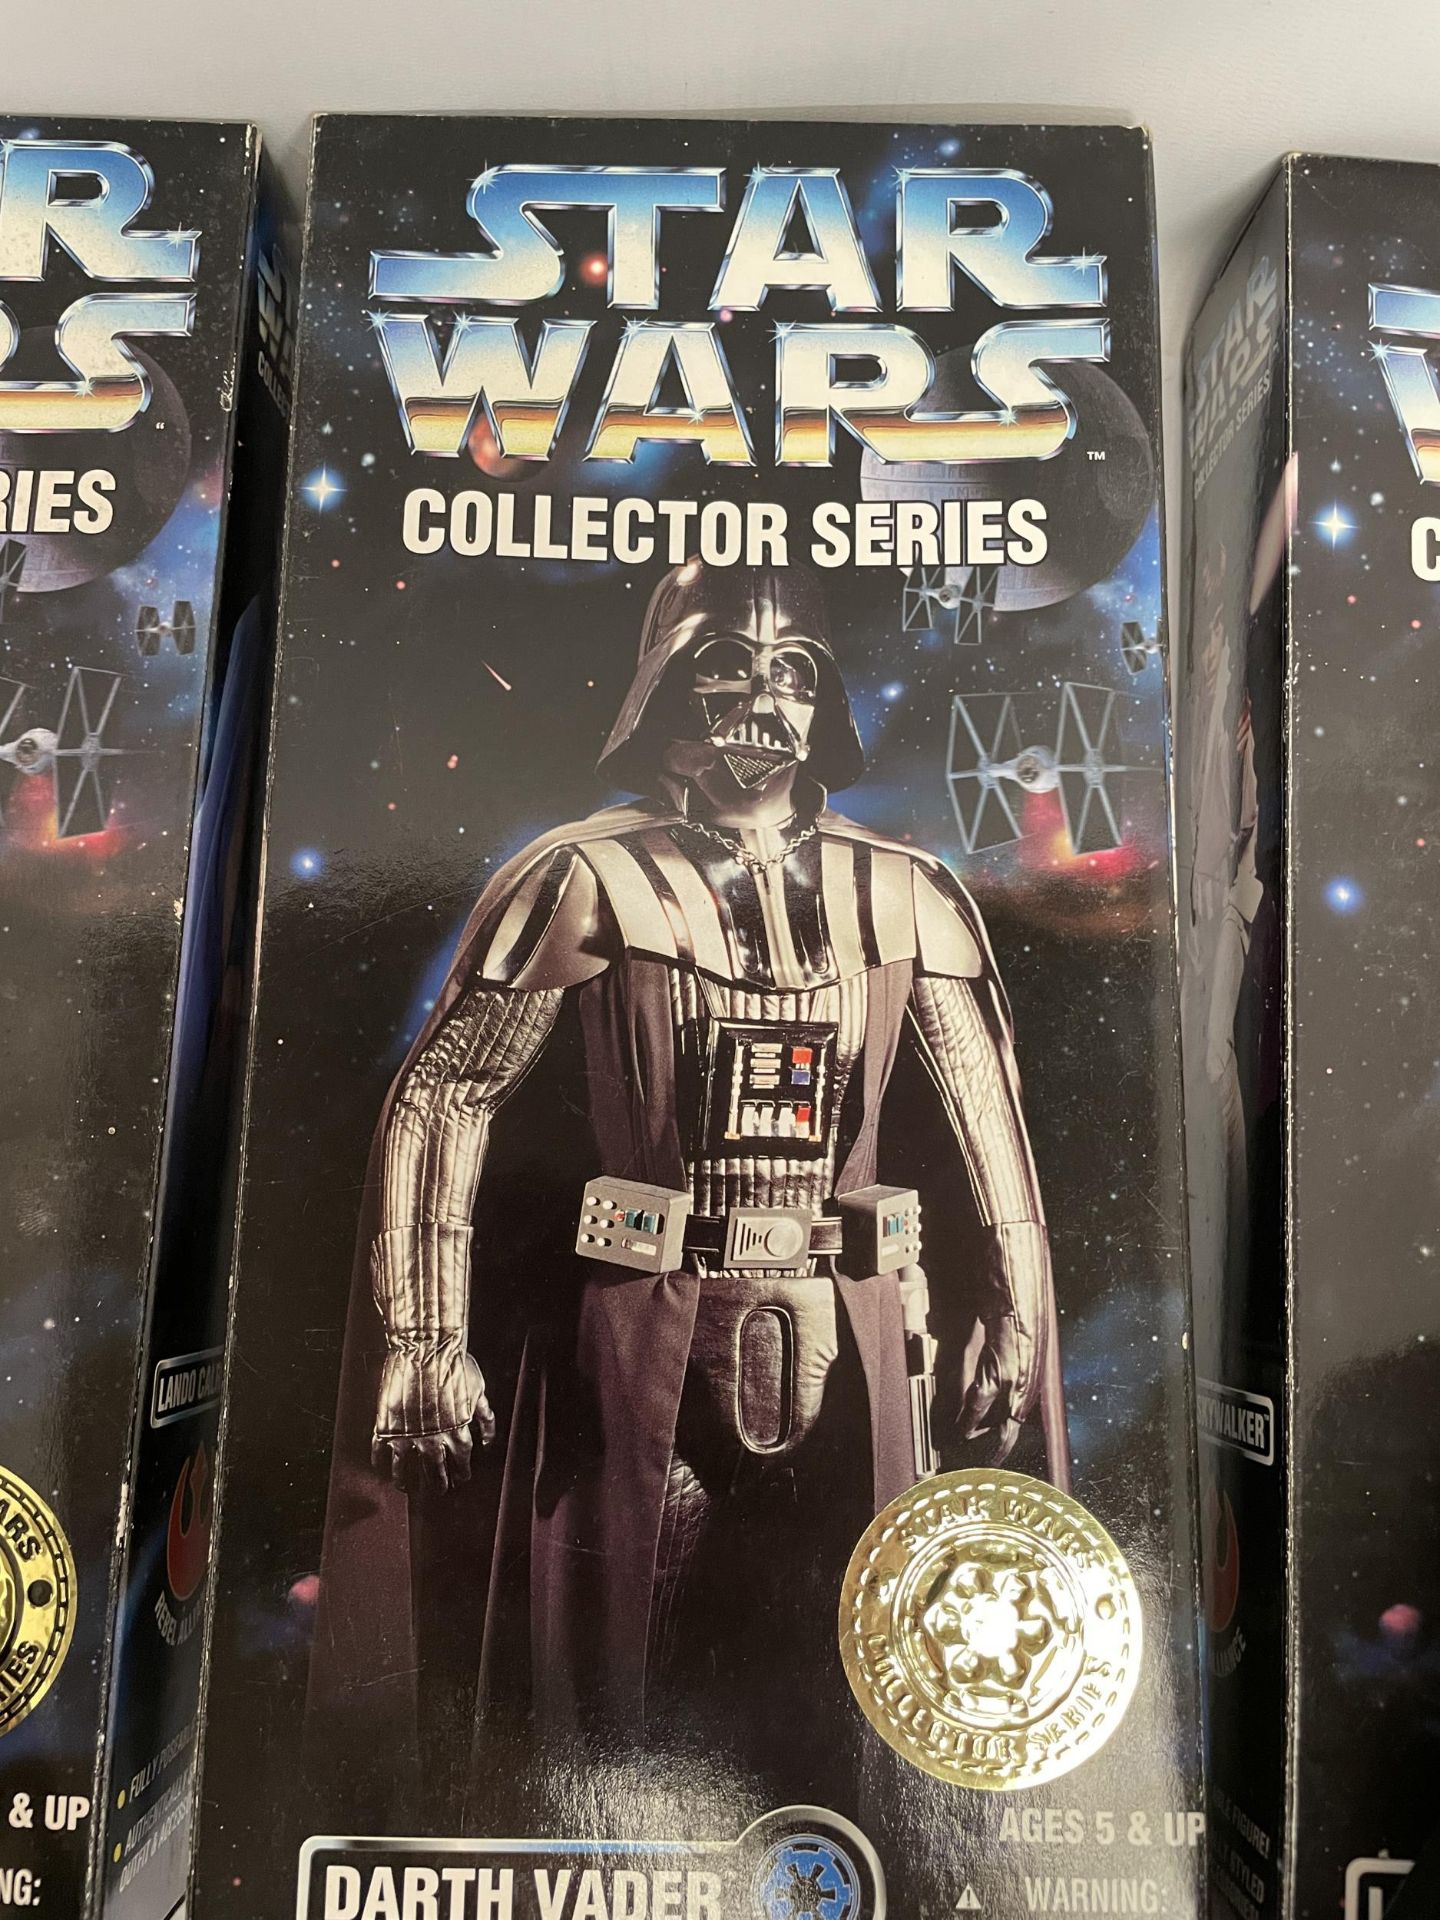 FIVE BOXED KENNER STAR WARS COLLECTOR'S SERIES FIGURES TO INCLUDE DARTH VADER, HAN SOLO, LANDA - Image 2 of 2